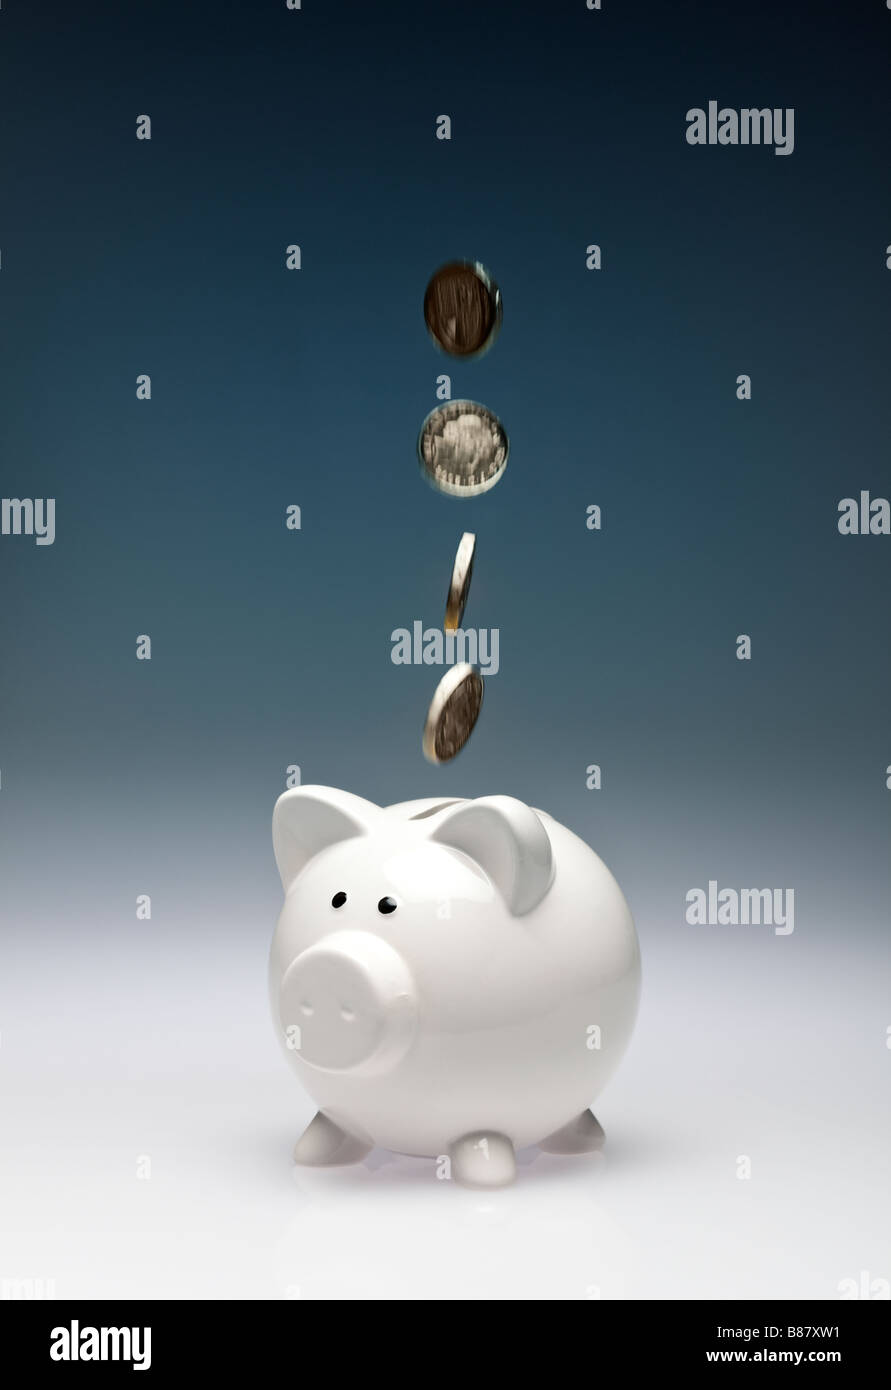 Concept finance saving - Pound coins sterling falling into a piggy bank - studio Stock Photo